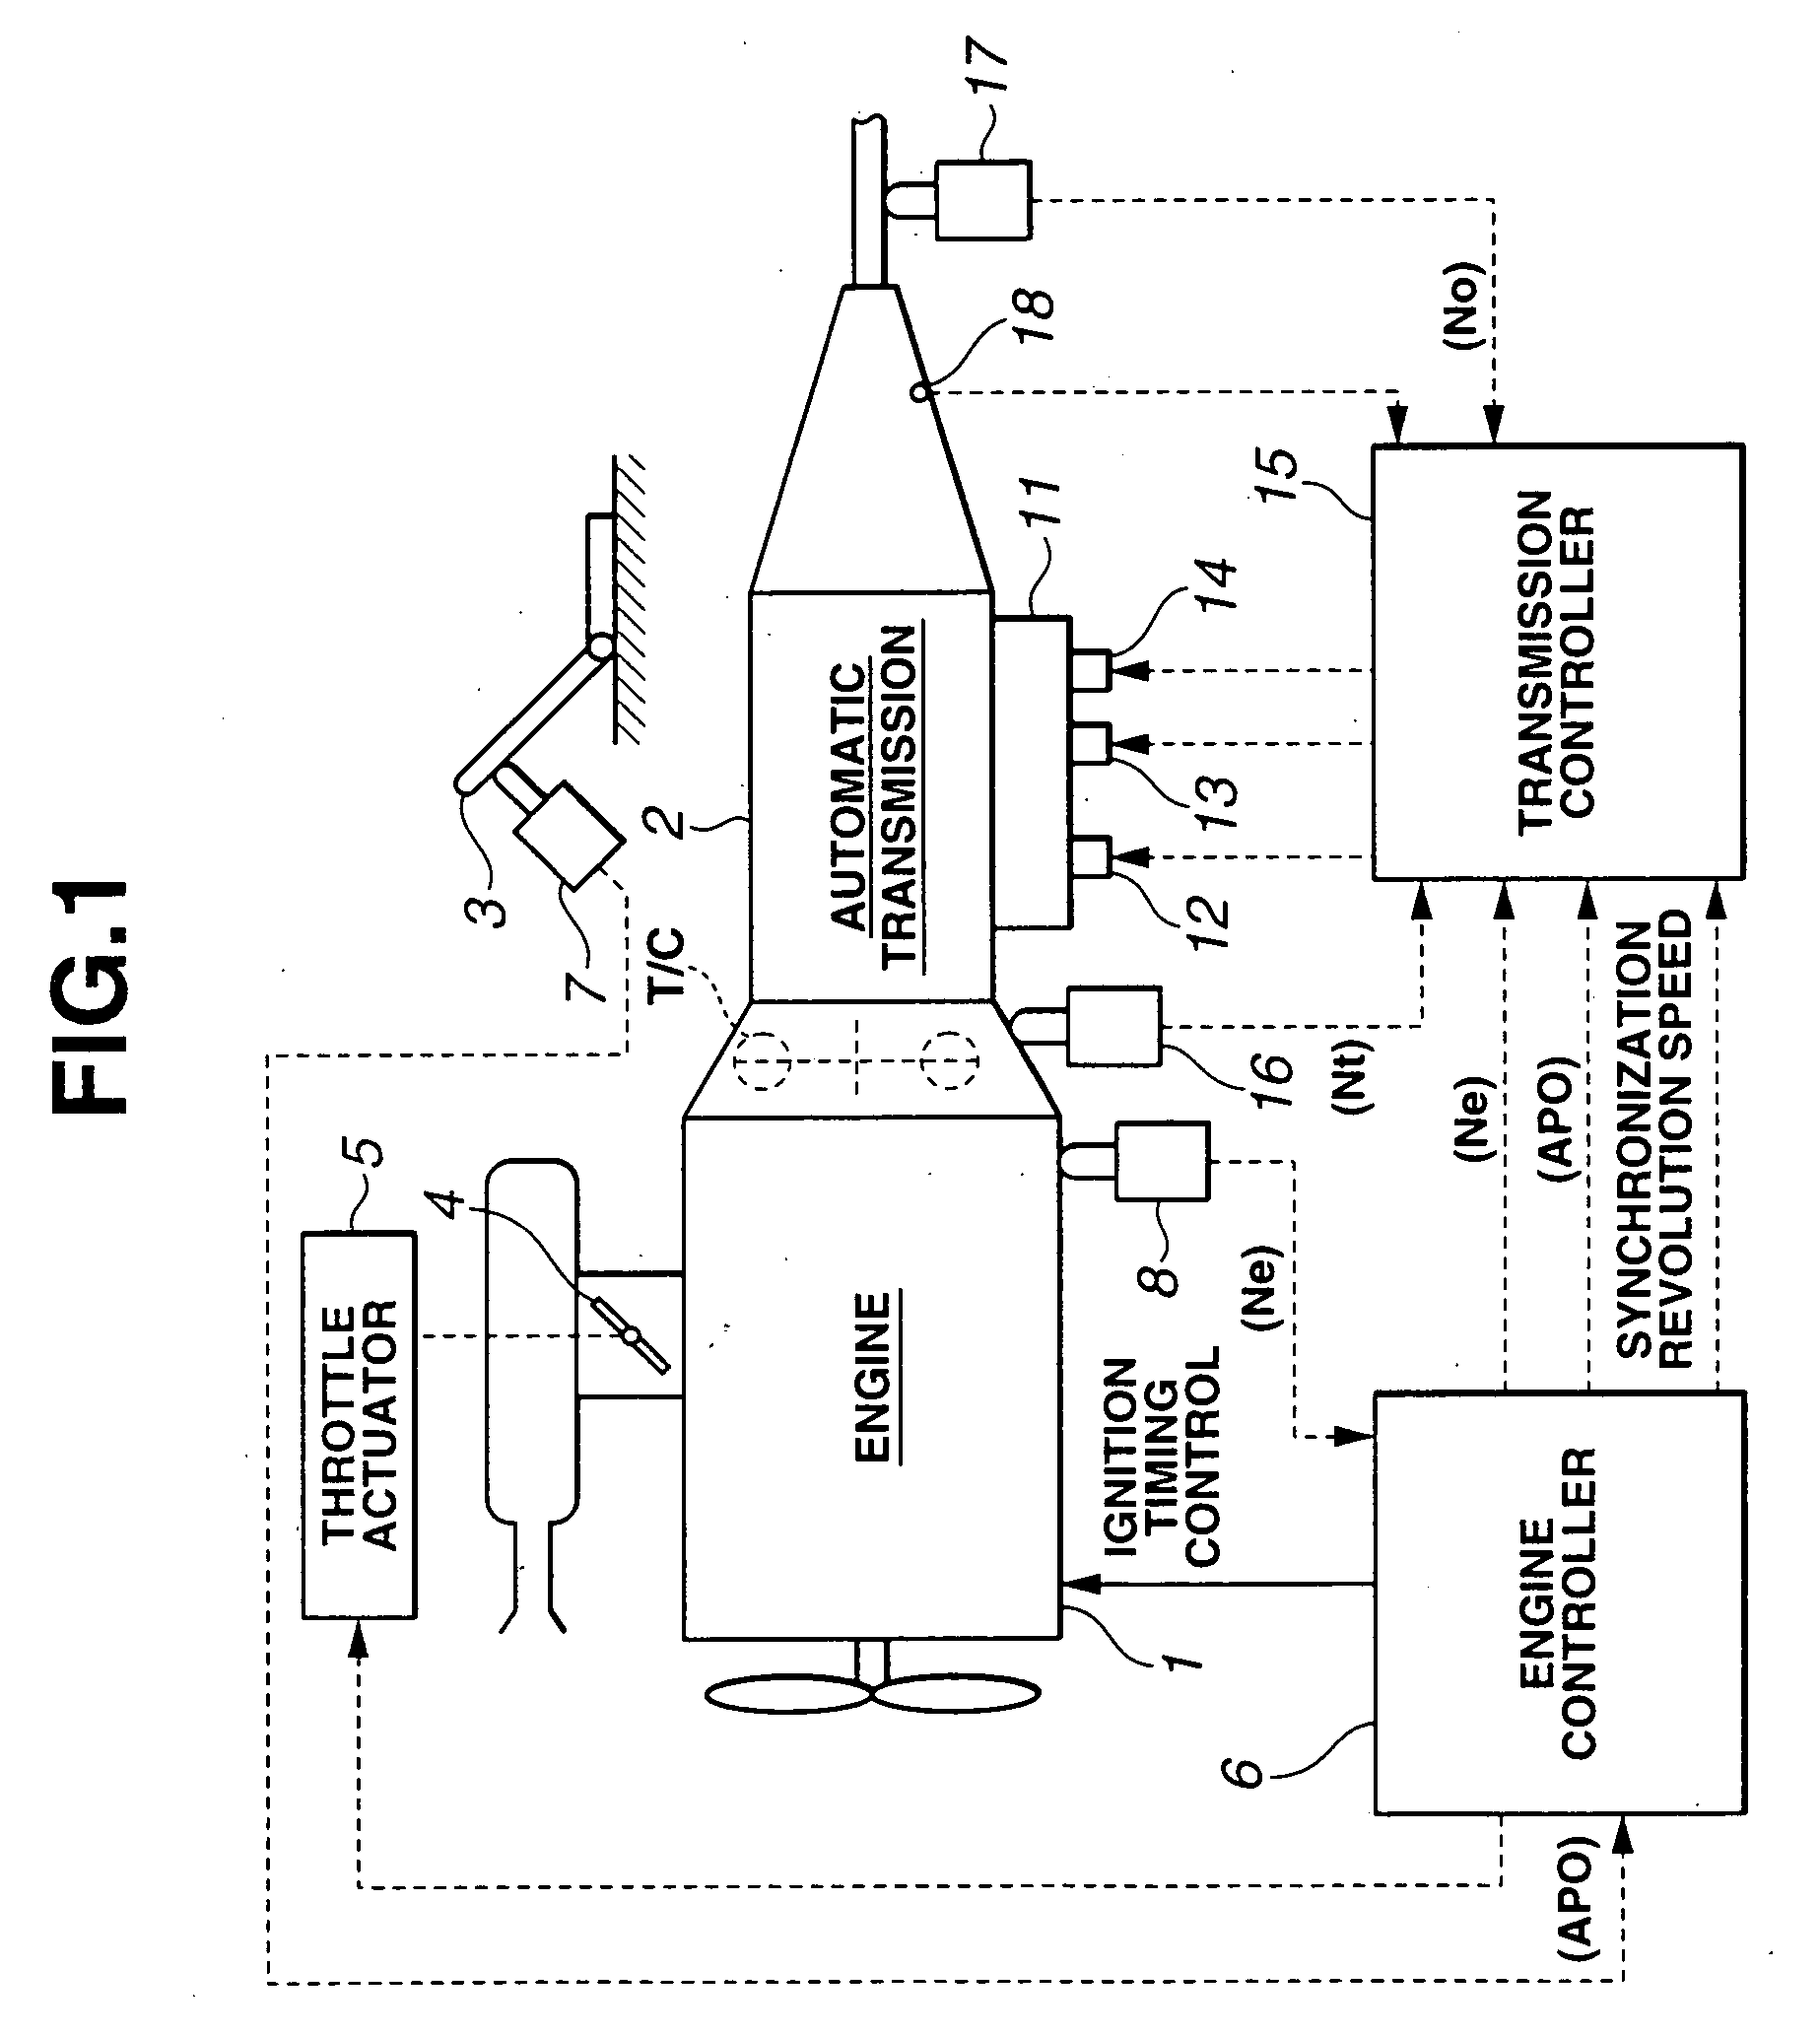 Shift control apparatus and method for automatic transmission